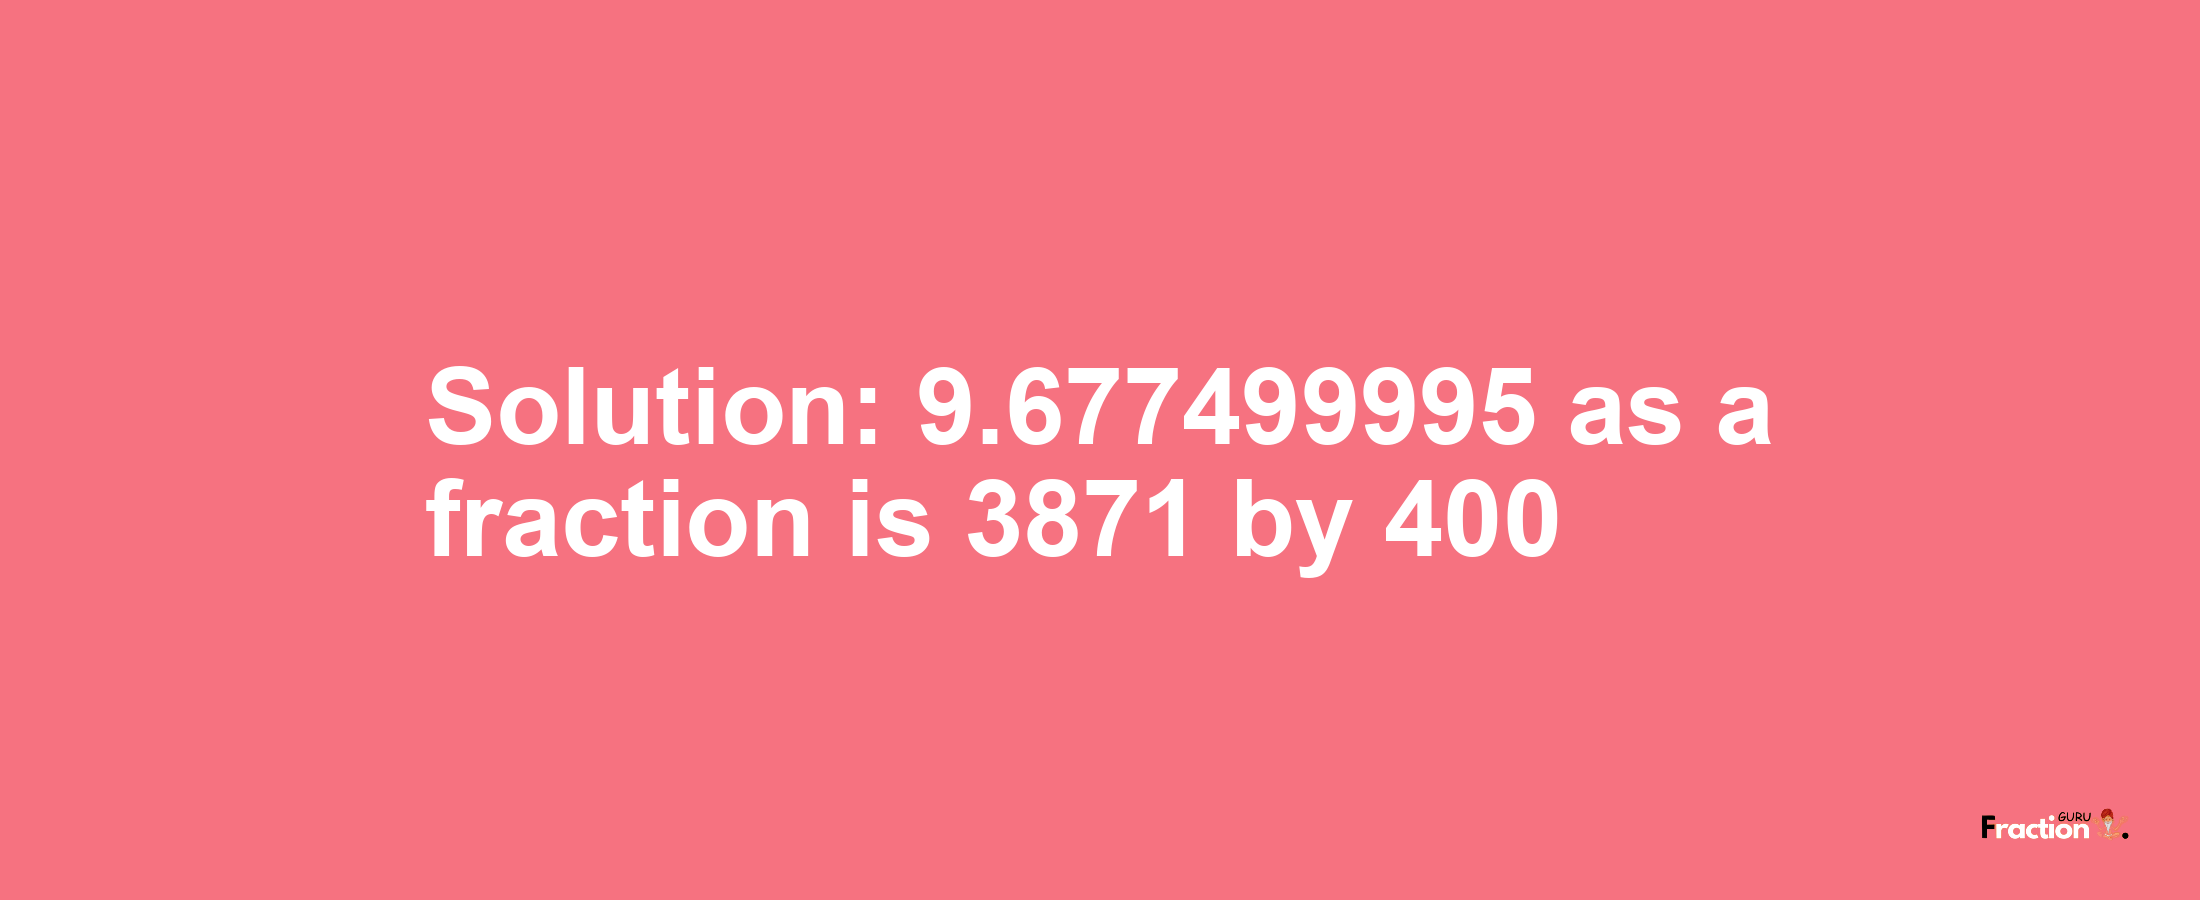 Solution:9.677499995 as a fraction is 3871/400